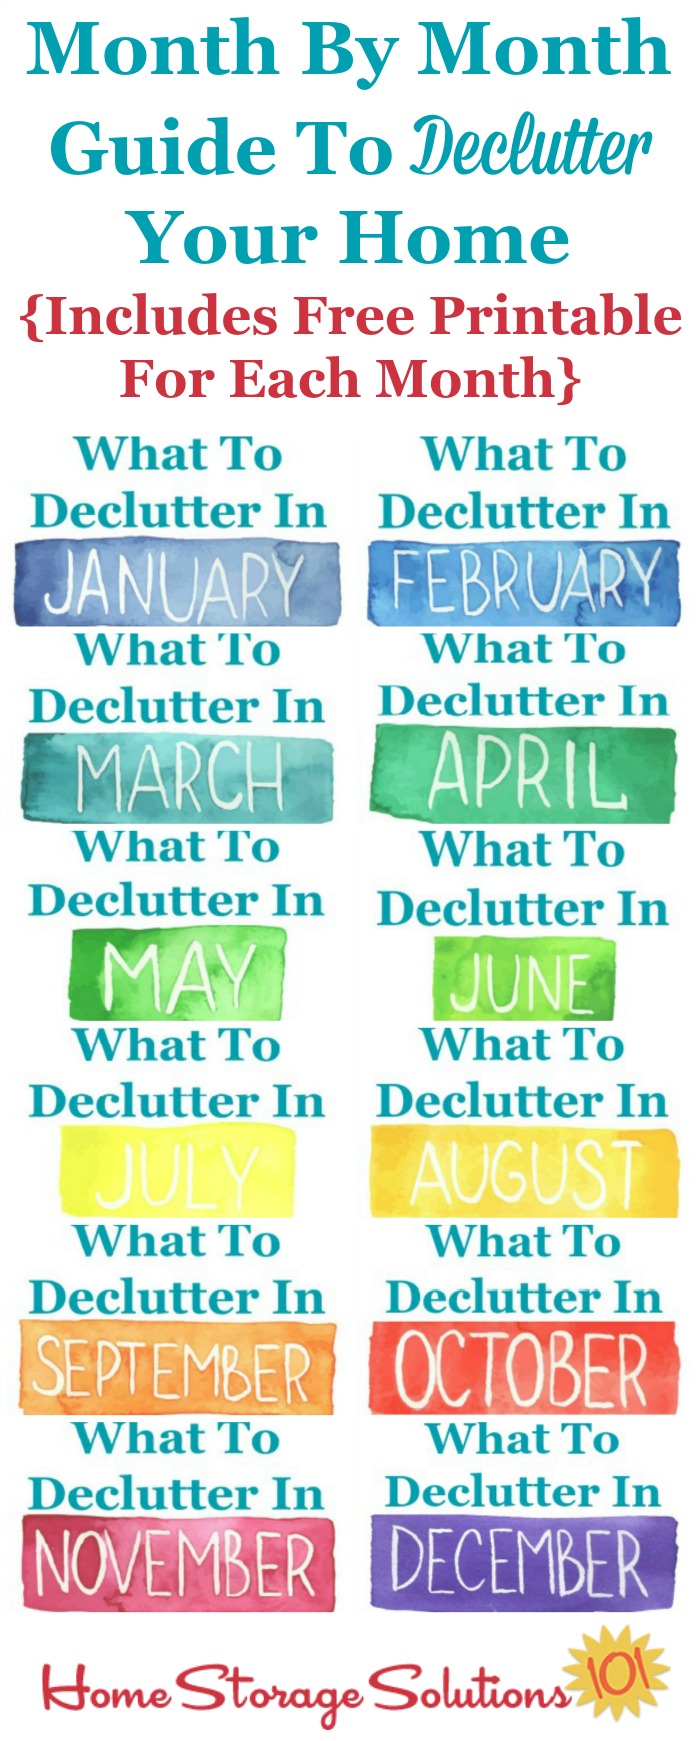 Month by month guide to declutter your entire home over the course of a year. Get free printable calendars for each month. {courtesy of Home Storage Solutions 101}